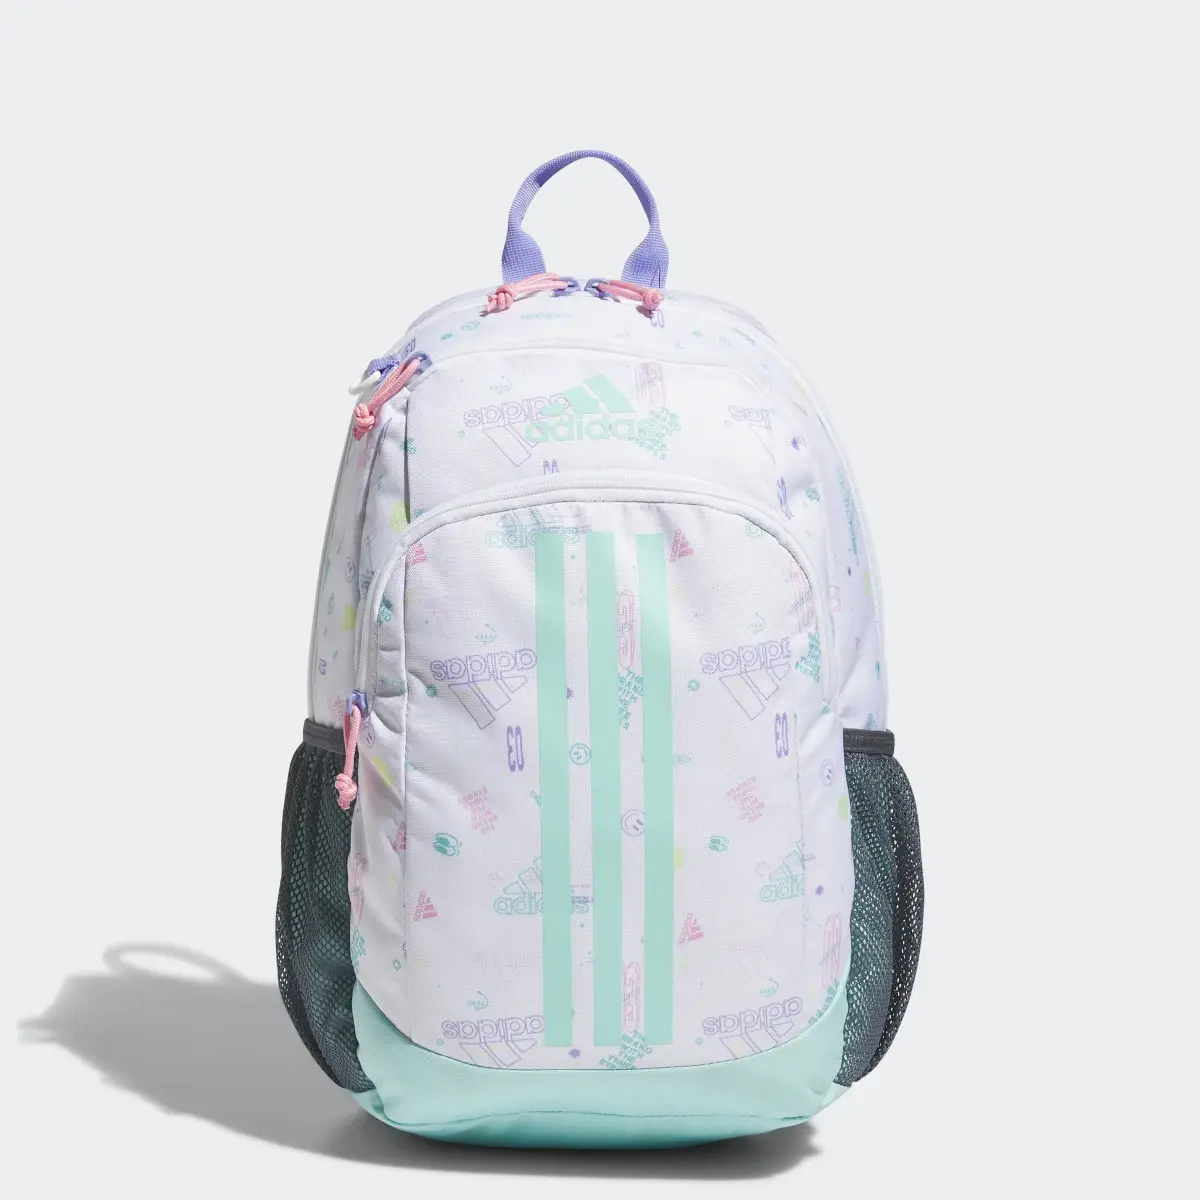 Adidas Young BTS Creator Backpack. 1